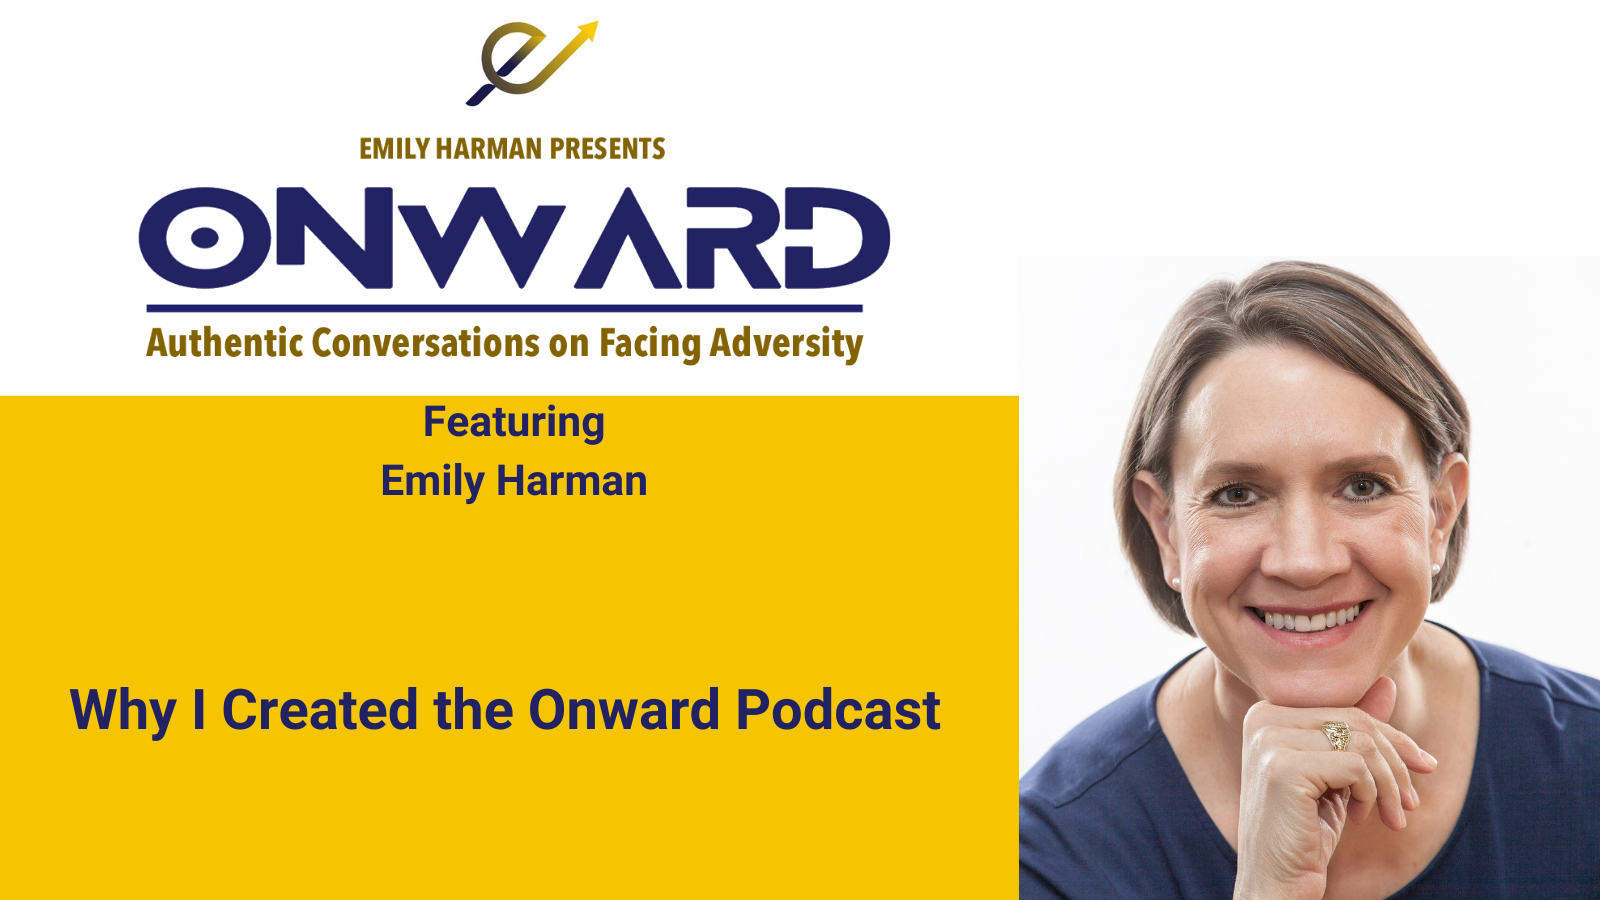 Onward Podcast Logo and Guest Emily Harman